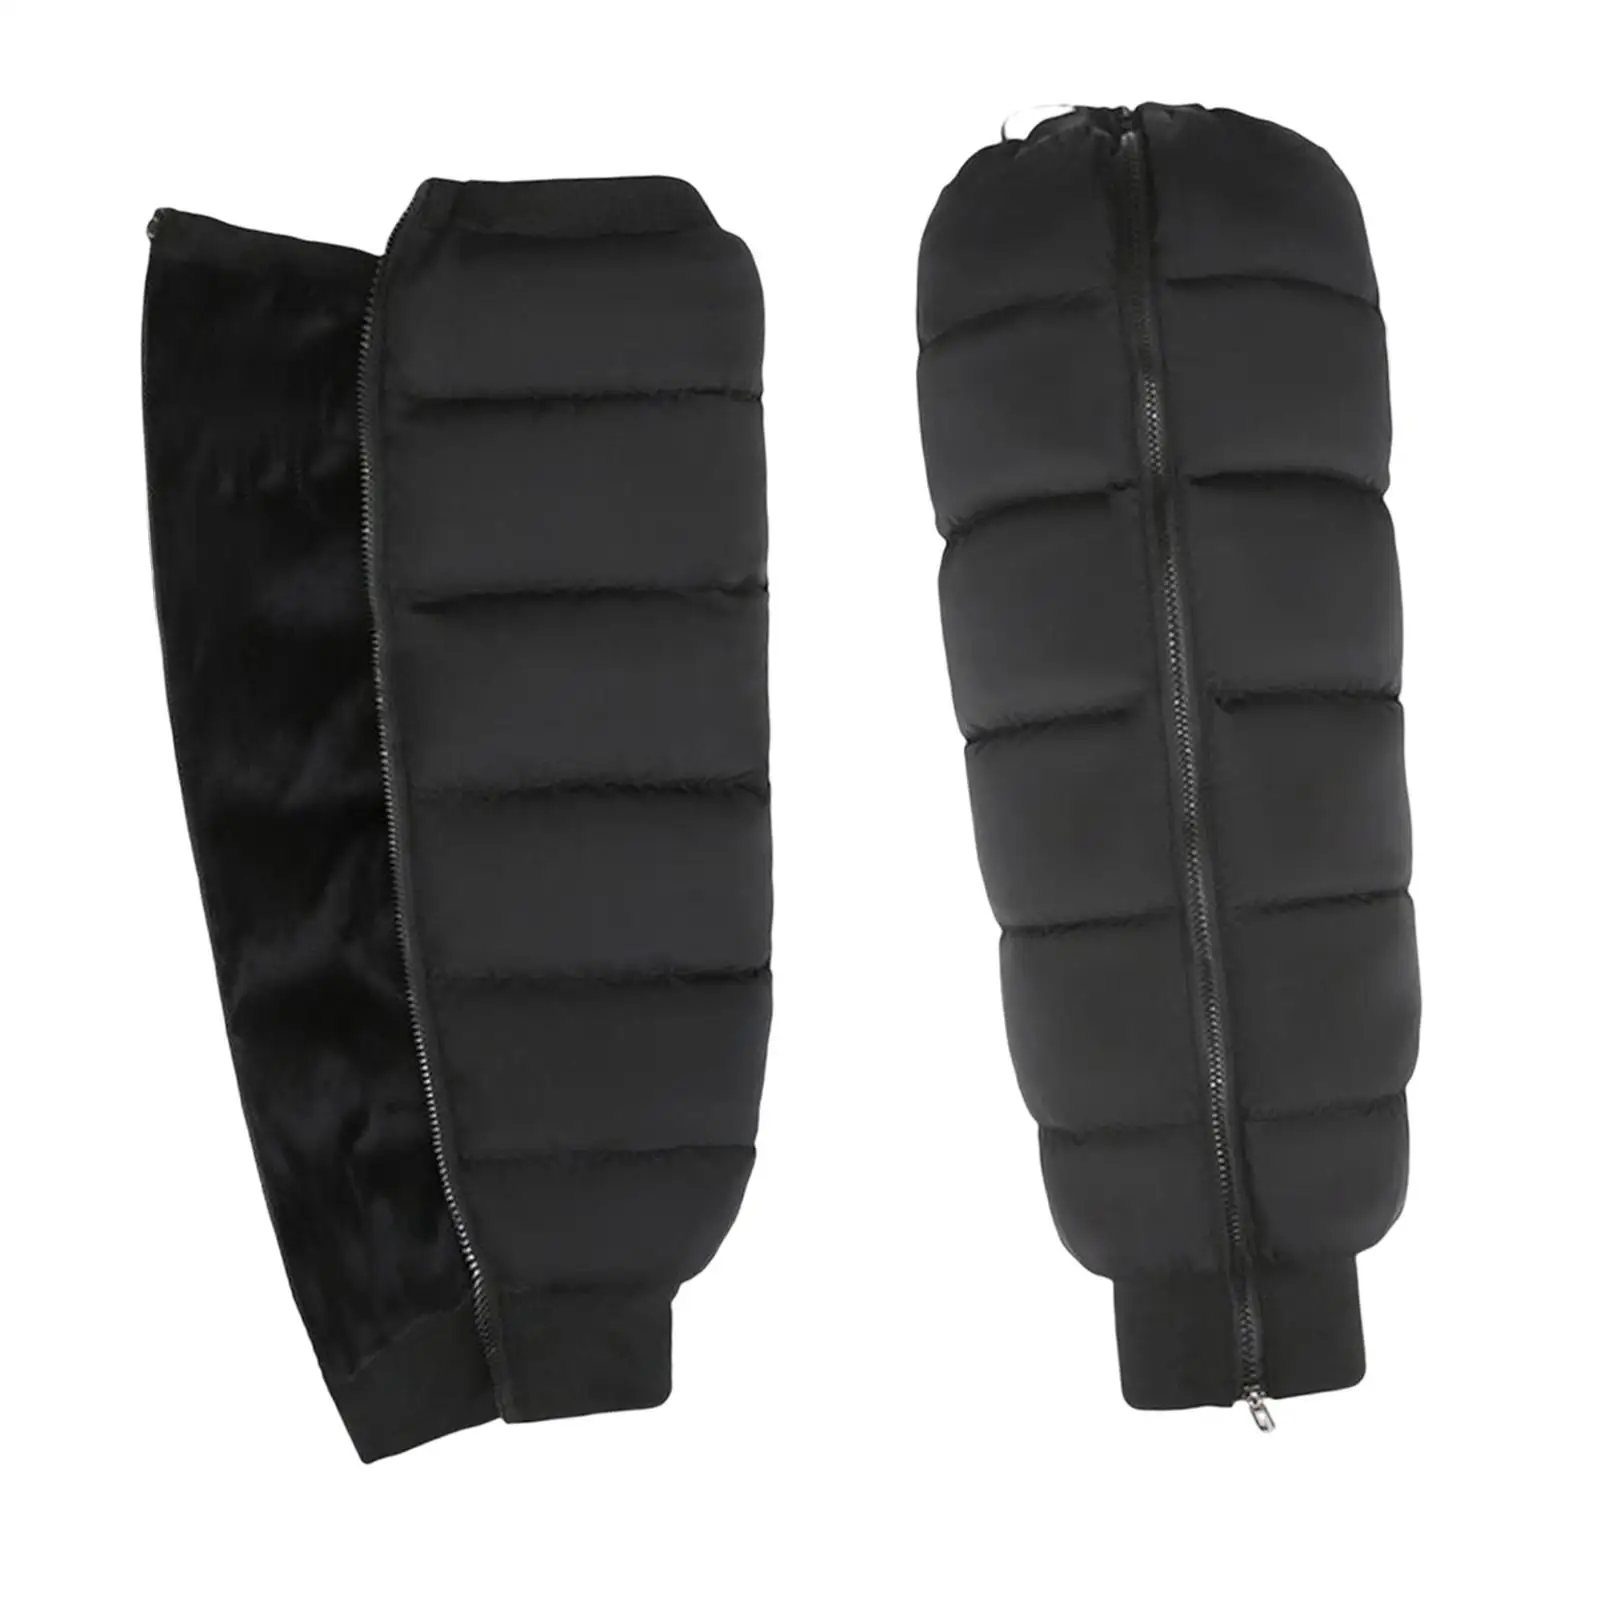 2 Packs Winter Knee Pads Protective Gear Windproof Protection for